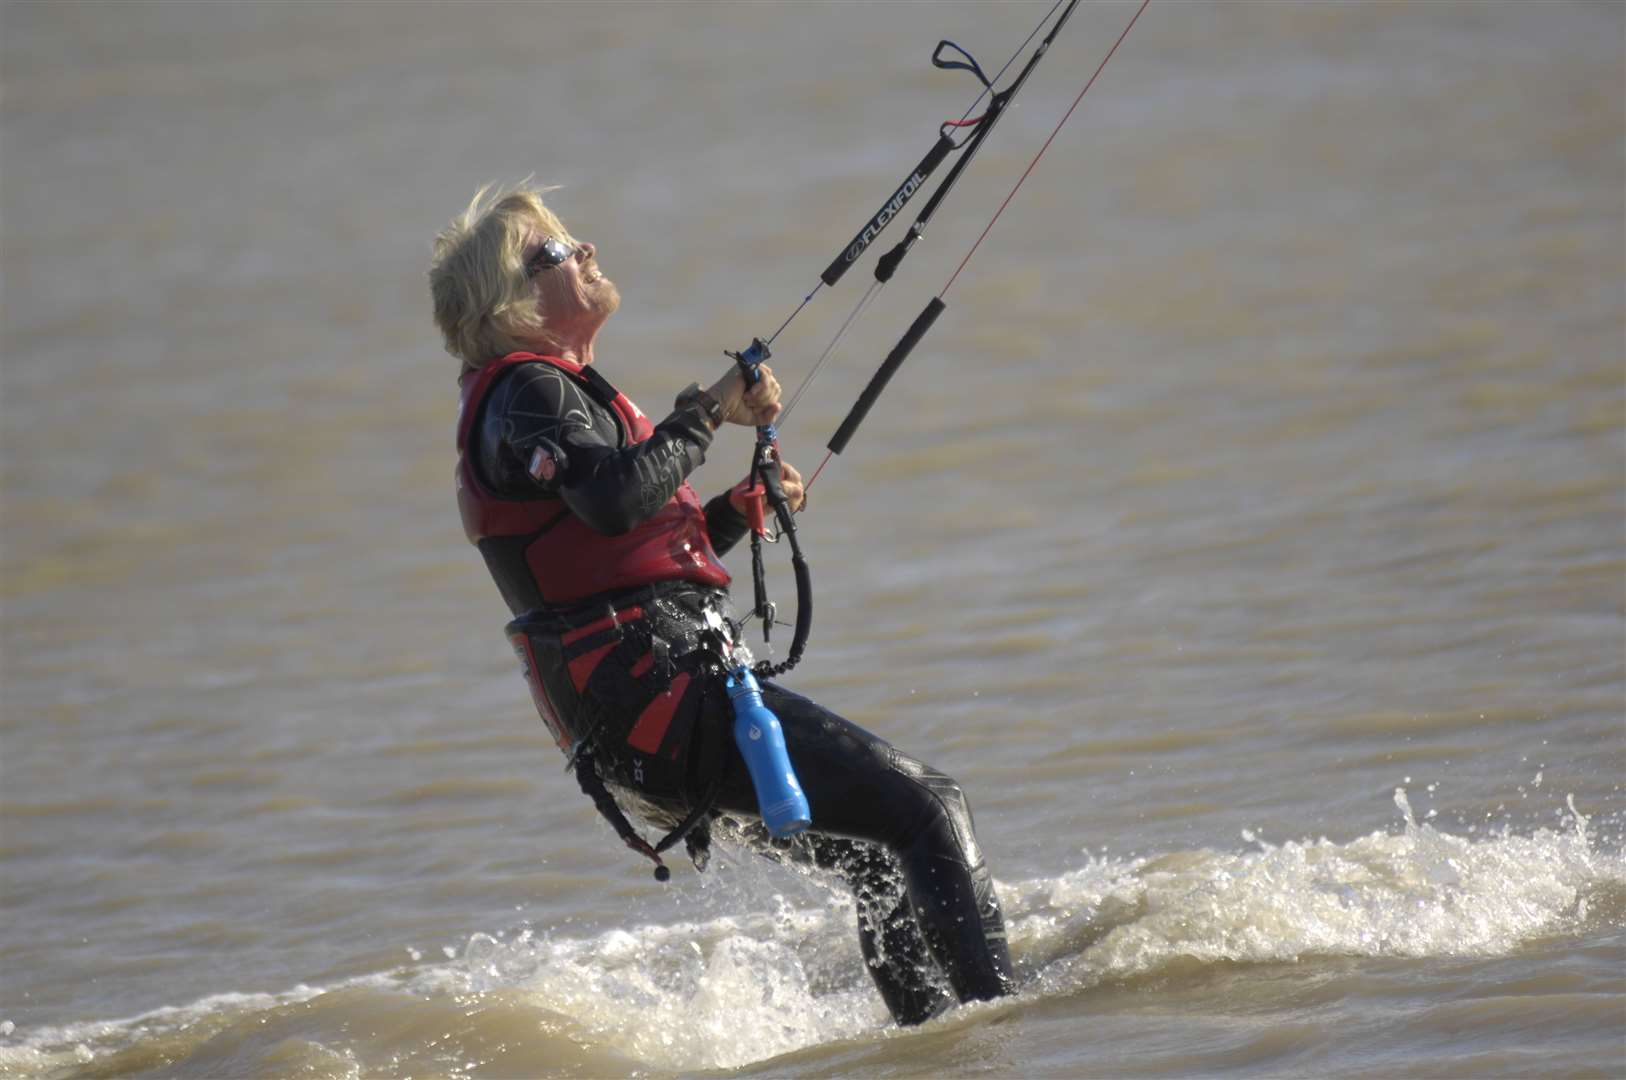 Richard Branson sets off to set the kite-surfing record across the Channel